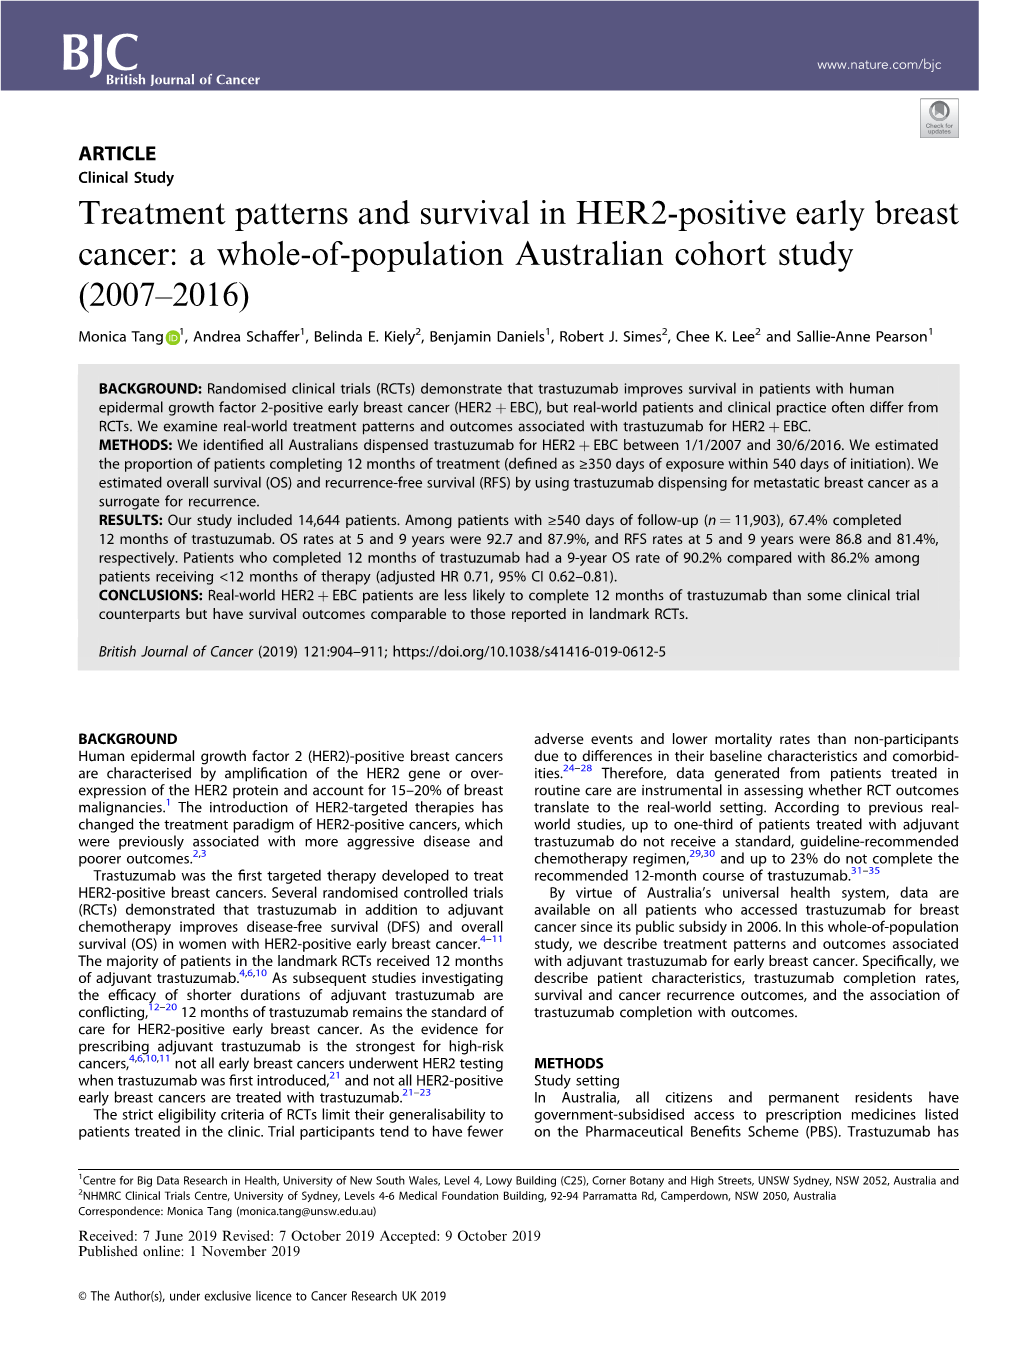 Treatment Patterns and Survival in HER2-Positive Early Breast Cancer: a Whole-Of-Population Australian Cohort Study (2007–2016)